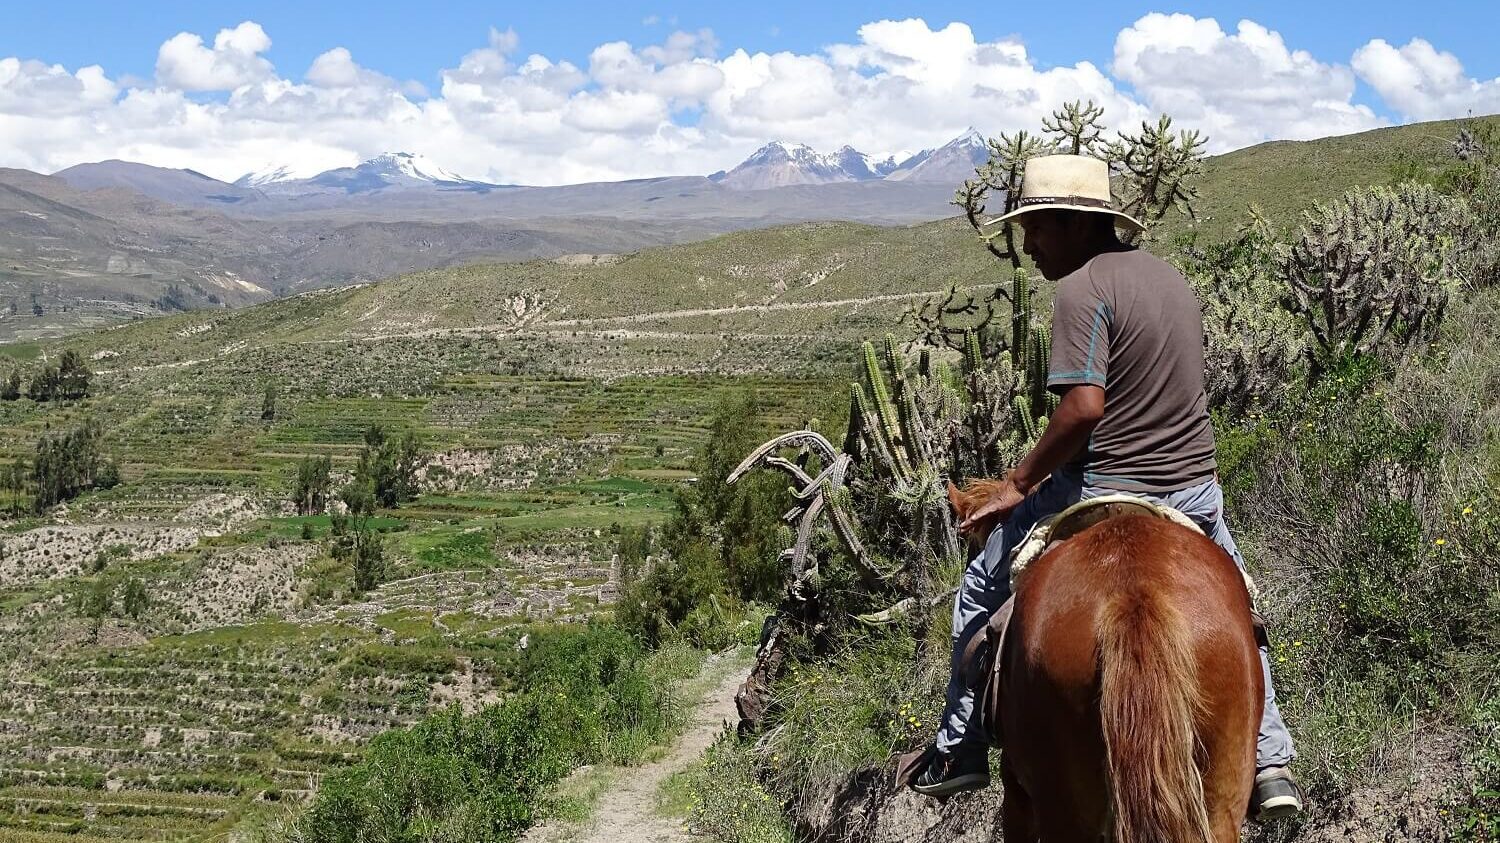 Horseriding through the terraces of the Colca Canyon with volcanoes on the background, as part of a homestay programme with RESPONSible Travel Peru